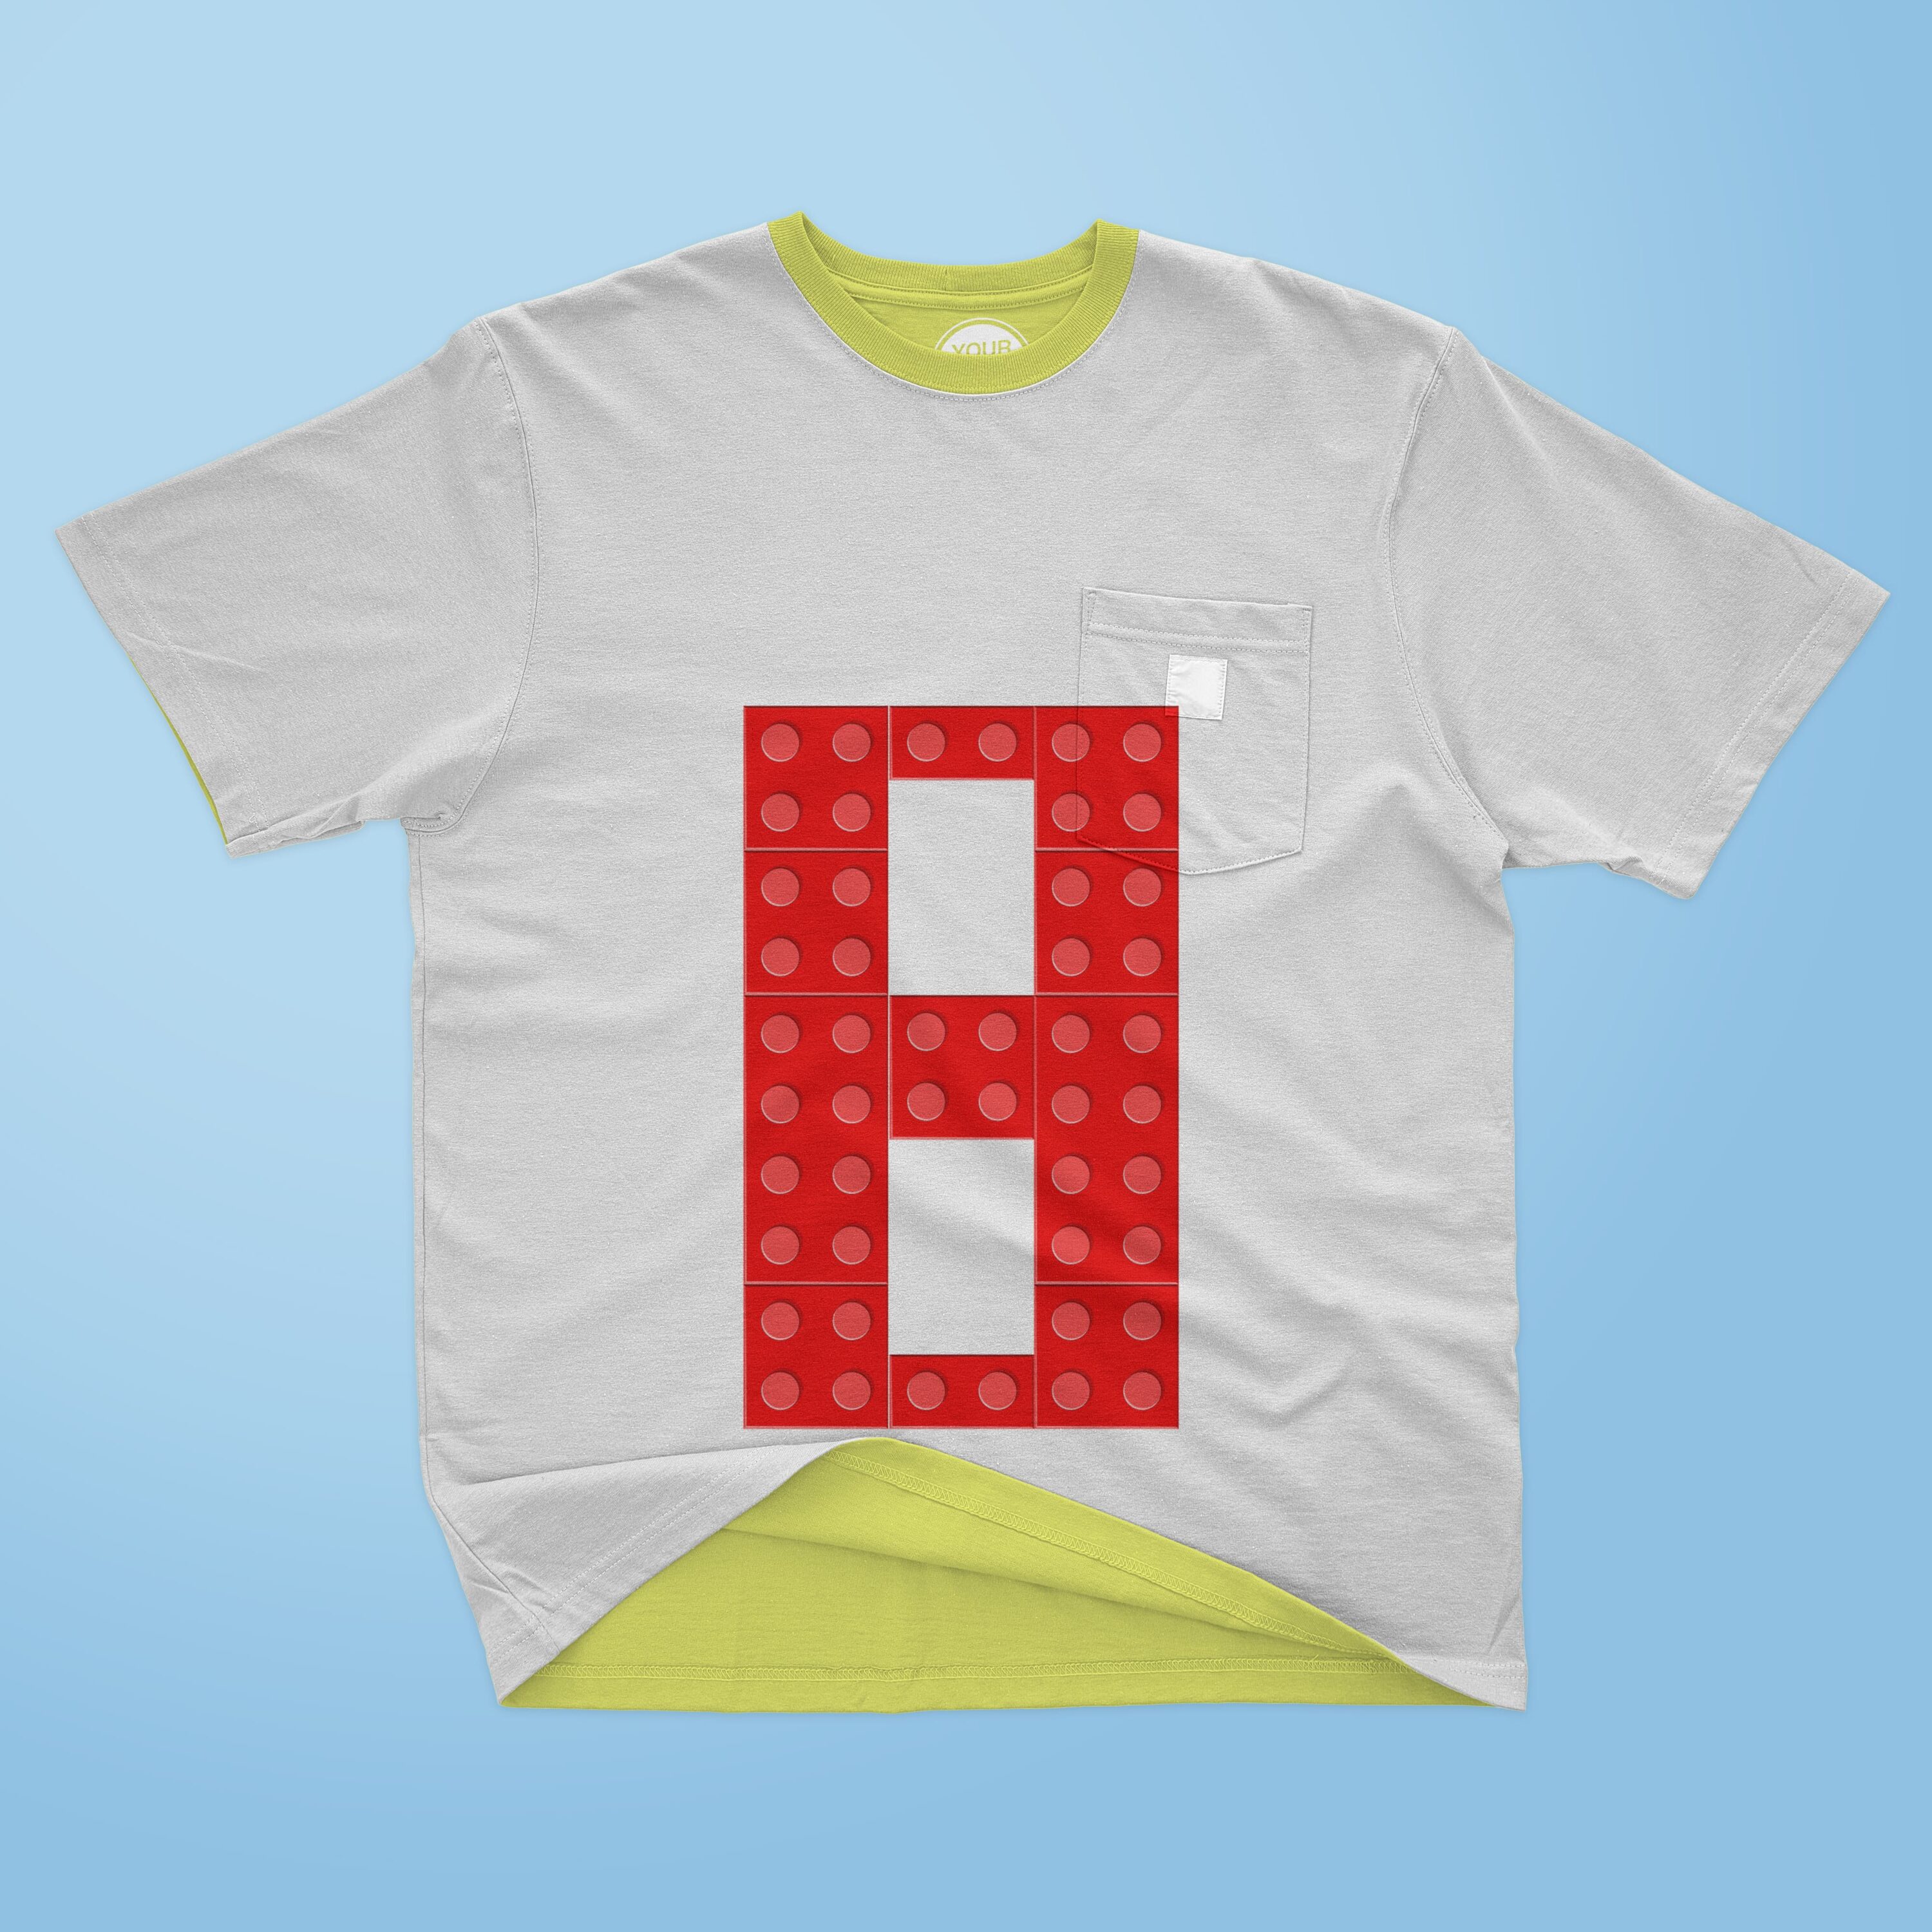 Number 8 made from red lego bricks - t-shirt design.